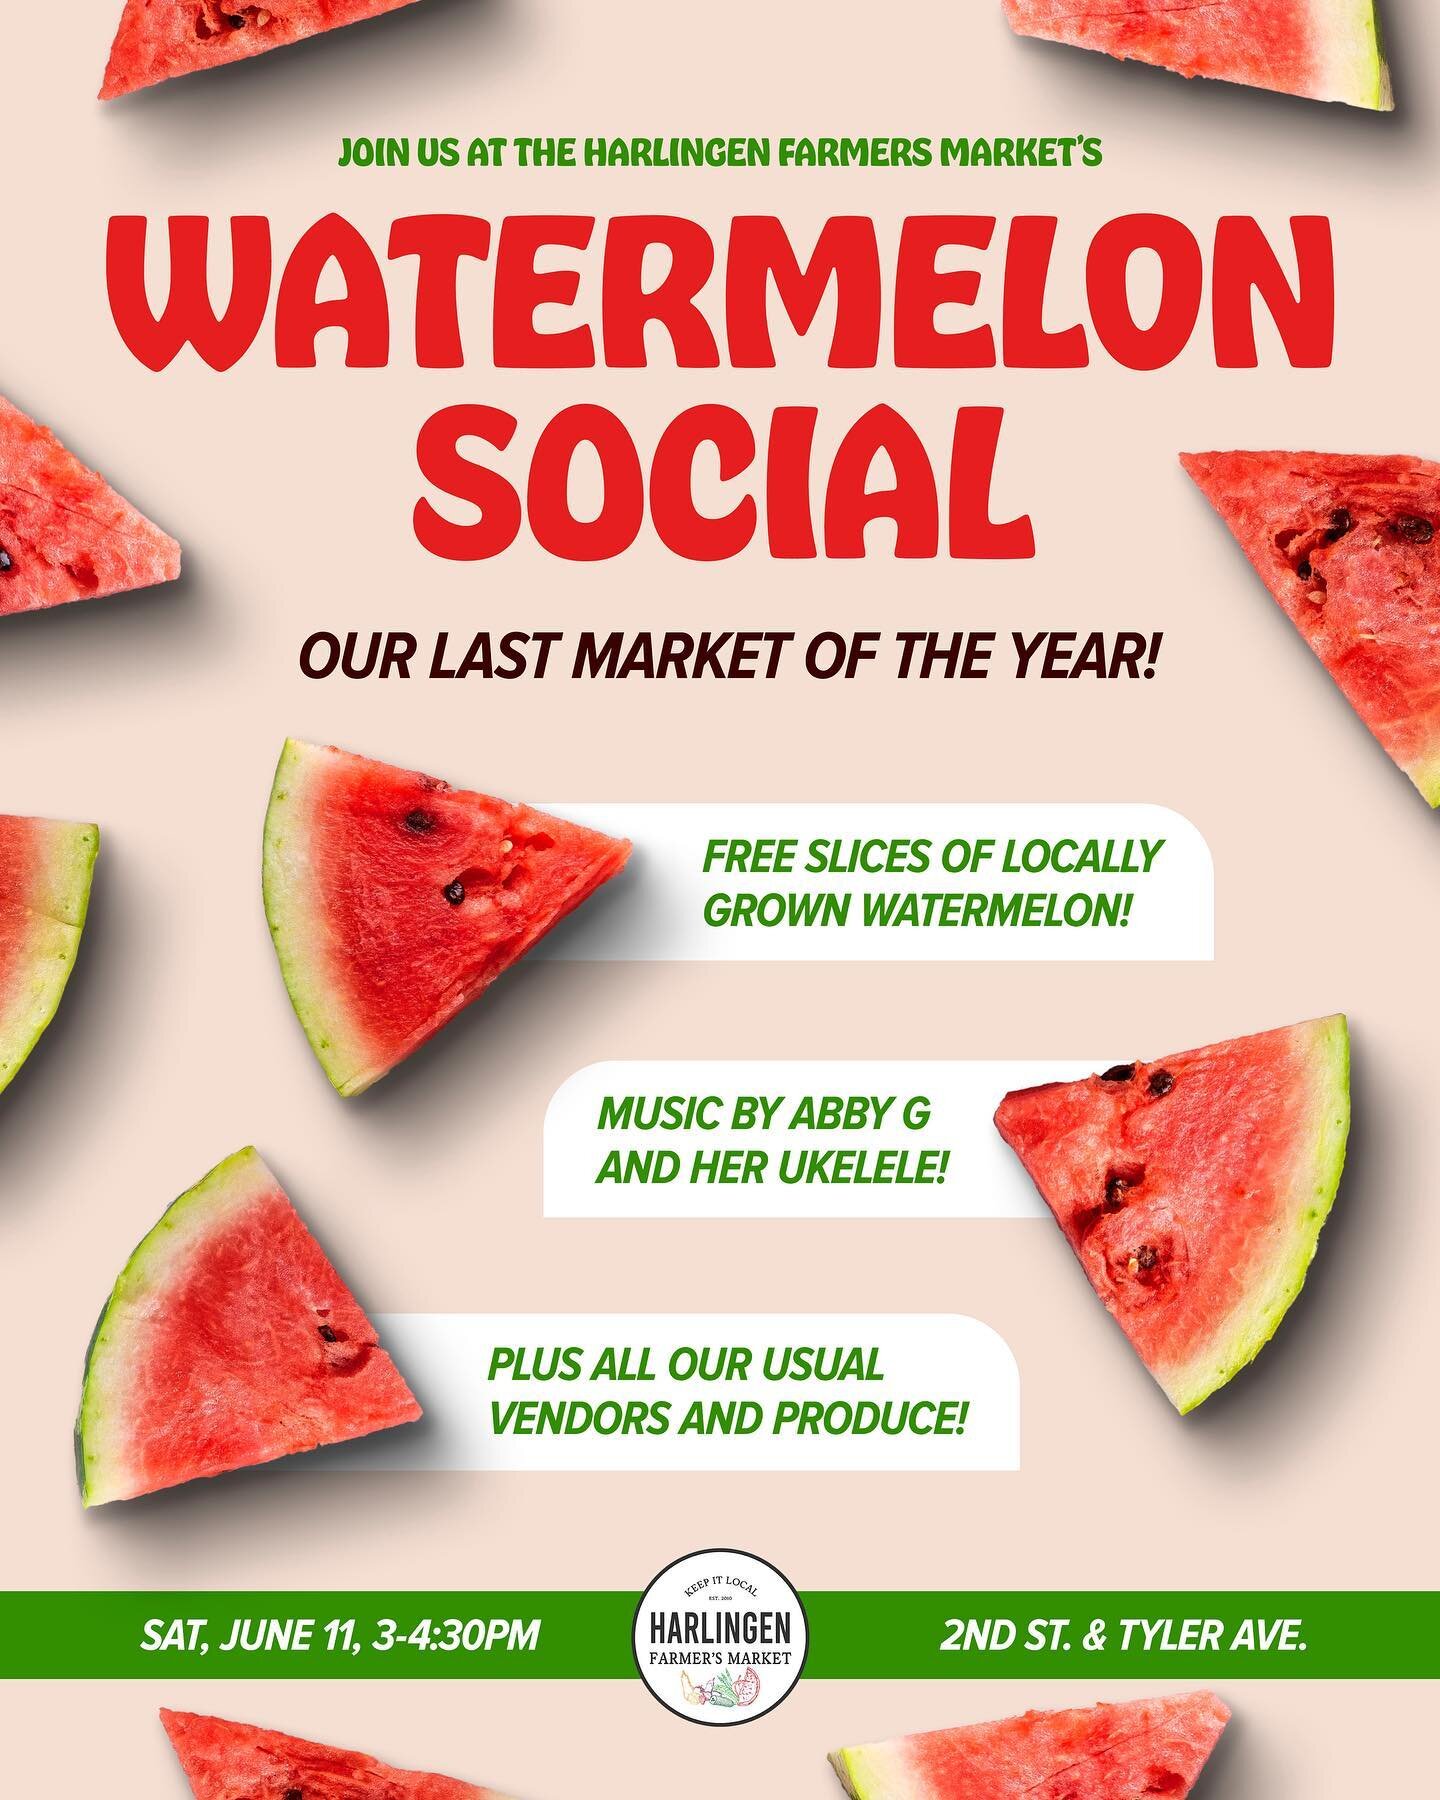 We&rsquo;ve had a great season! Come shop our final market of the season. We are celebrating by giving out free slices of cold locally grown watermelon 🍉. @abbymusicg is our musical guest this week. Her beautiful voice and her ukelele will make your